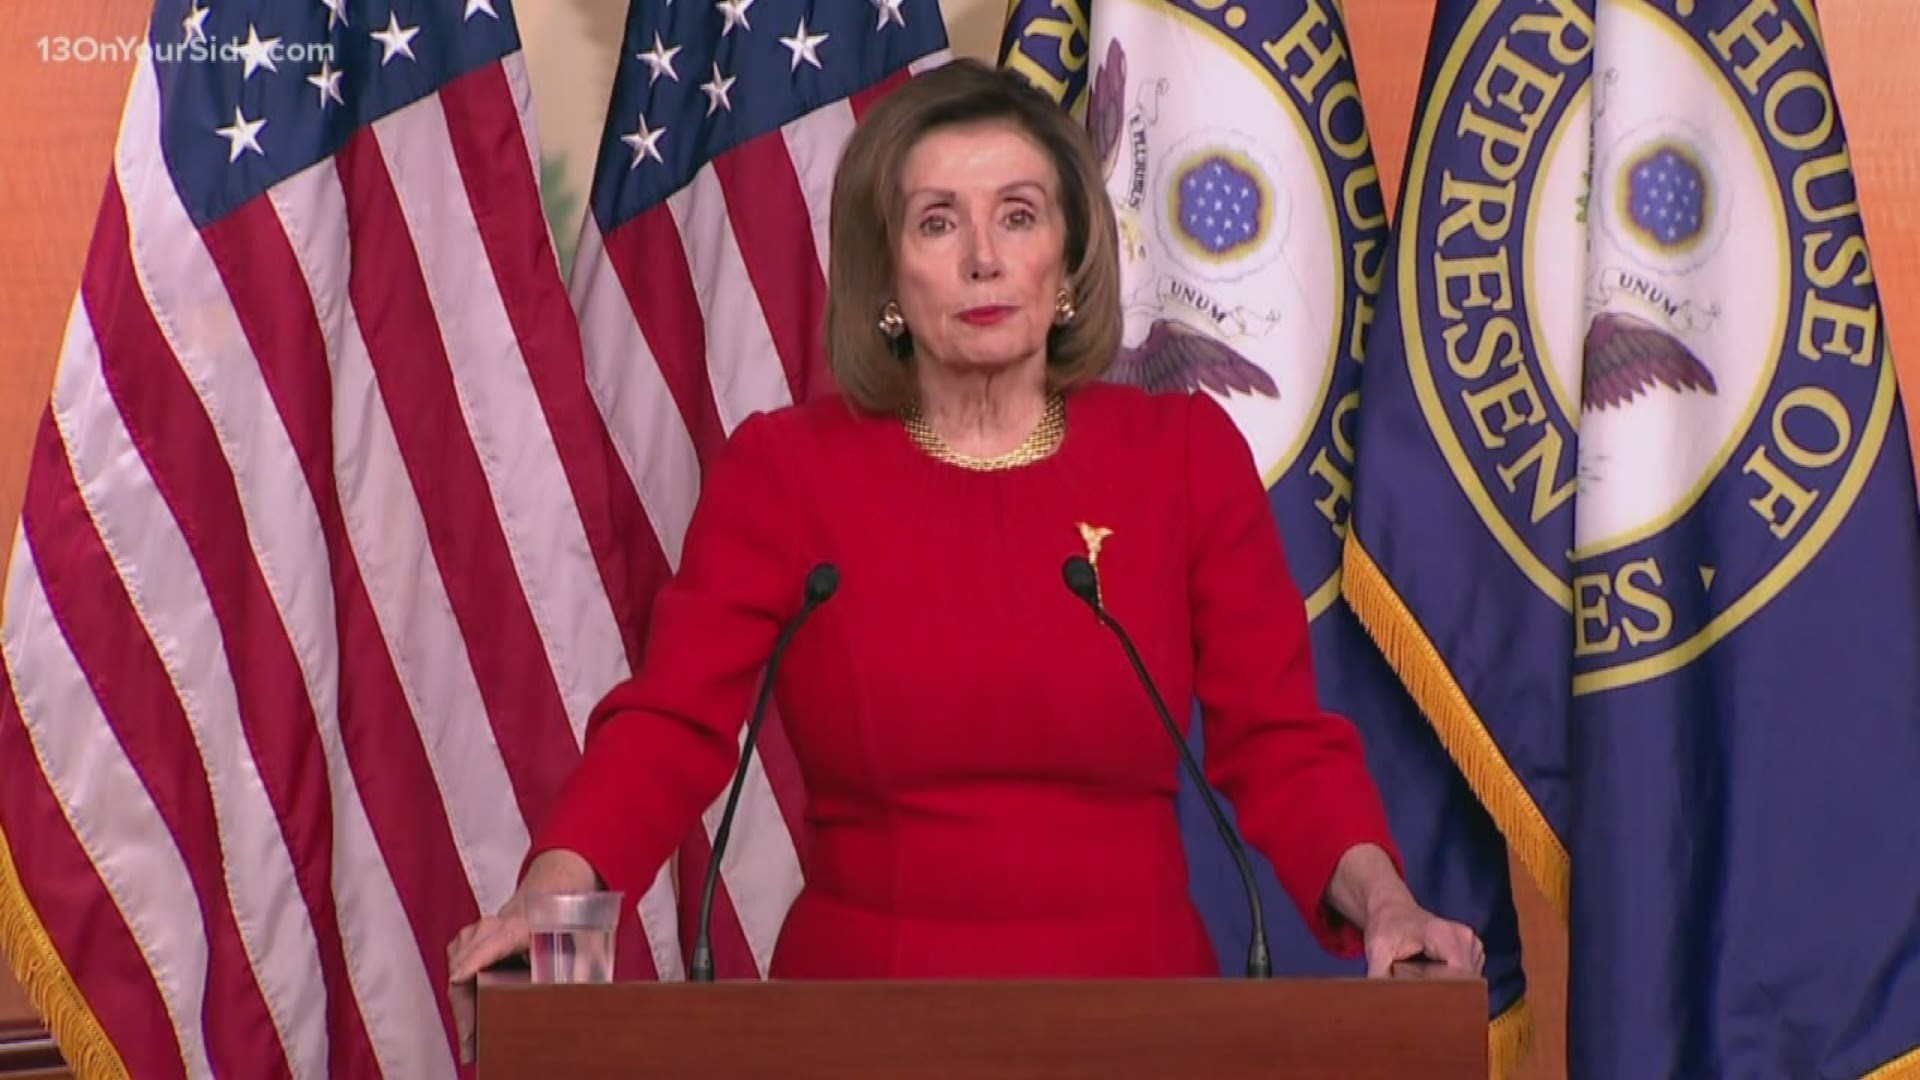 Nancy Pelosi promised as speaker she would “show the power of the gavel.”